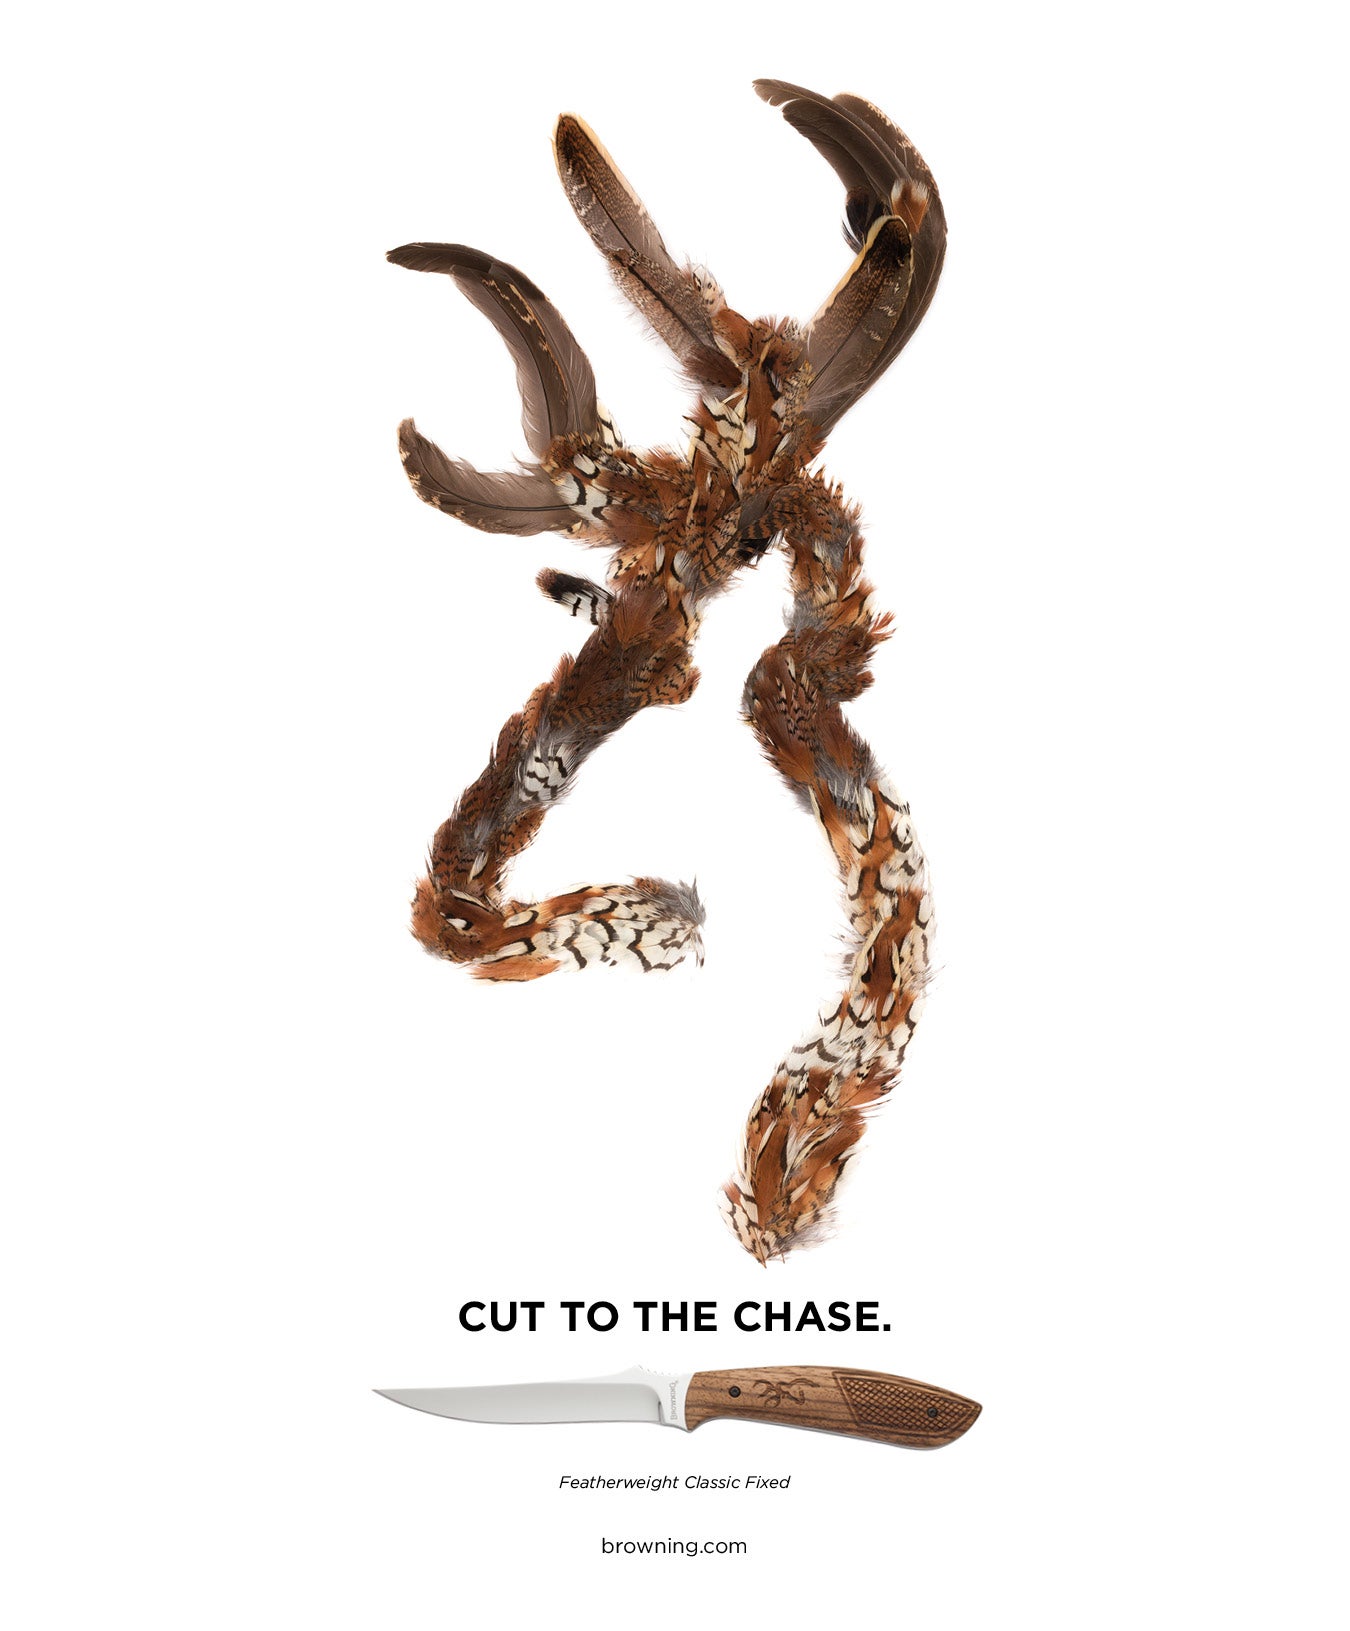 Cut to the chase, Quail Ad